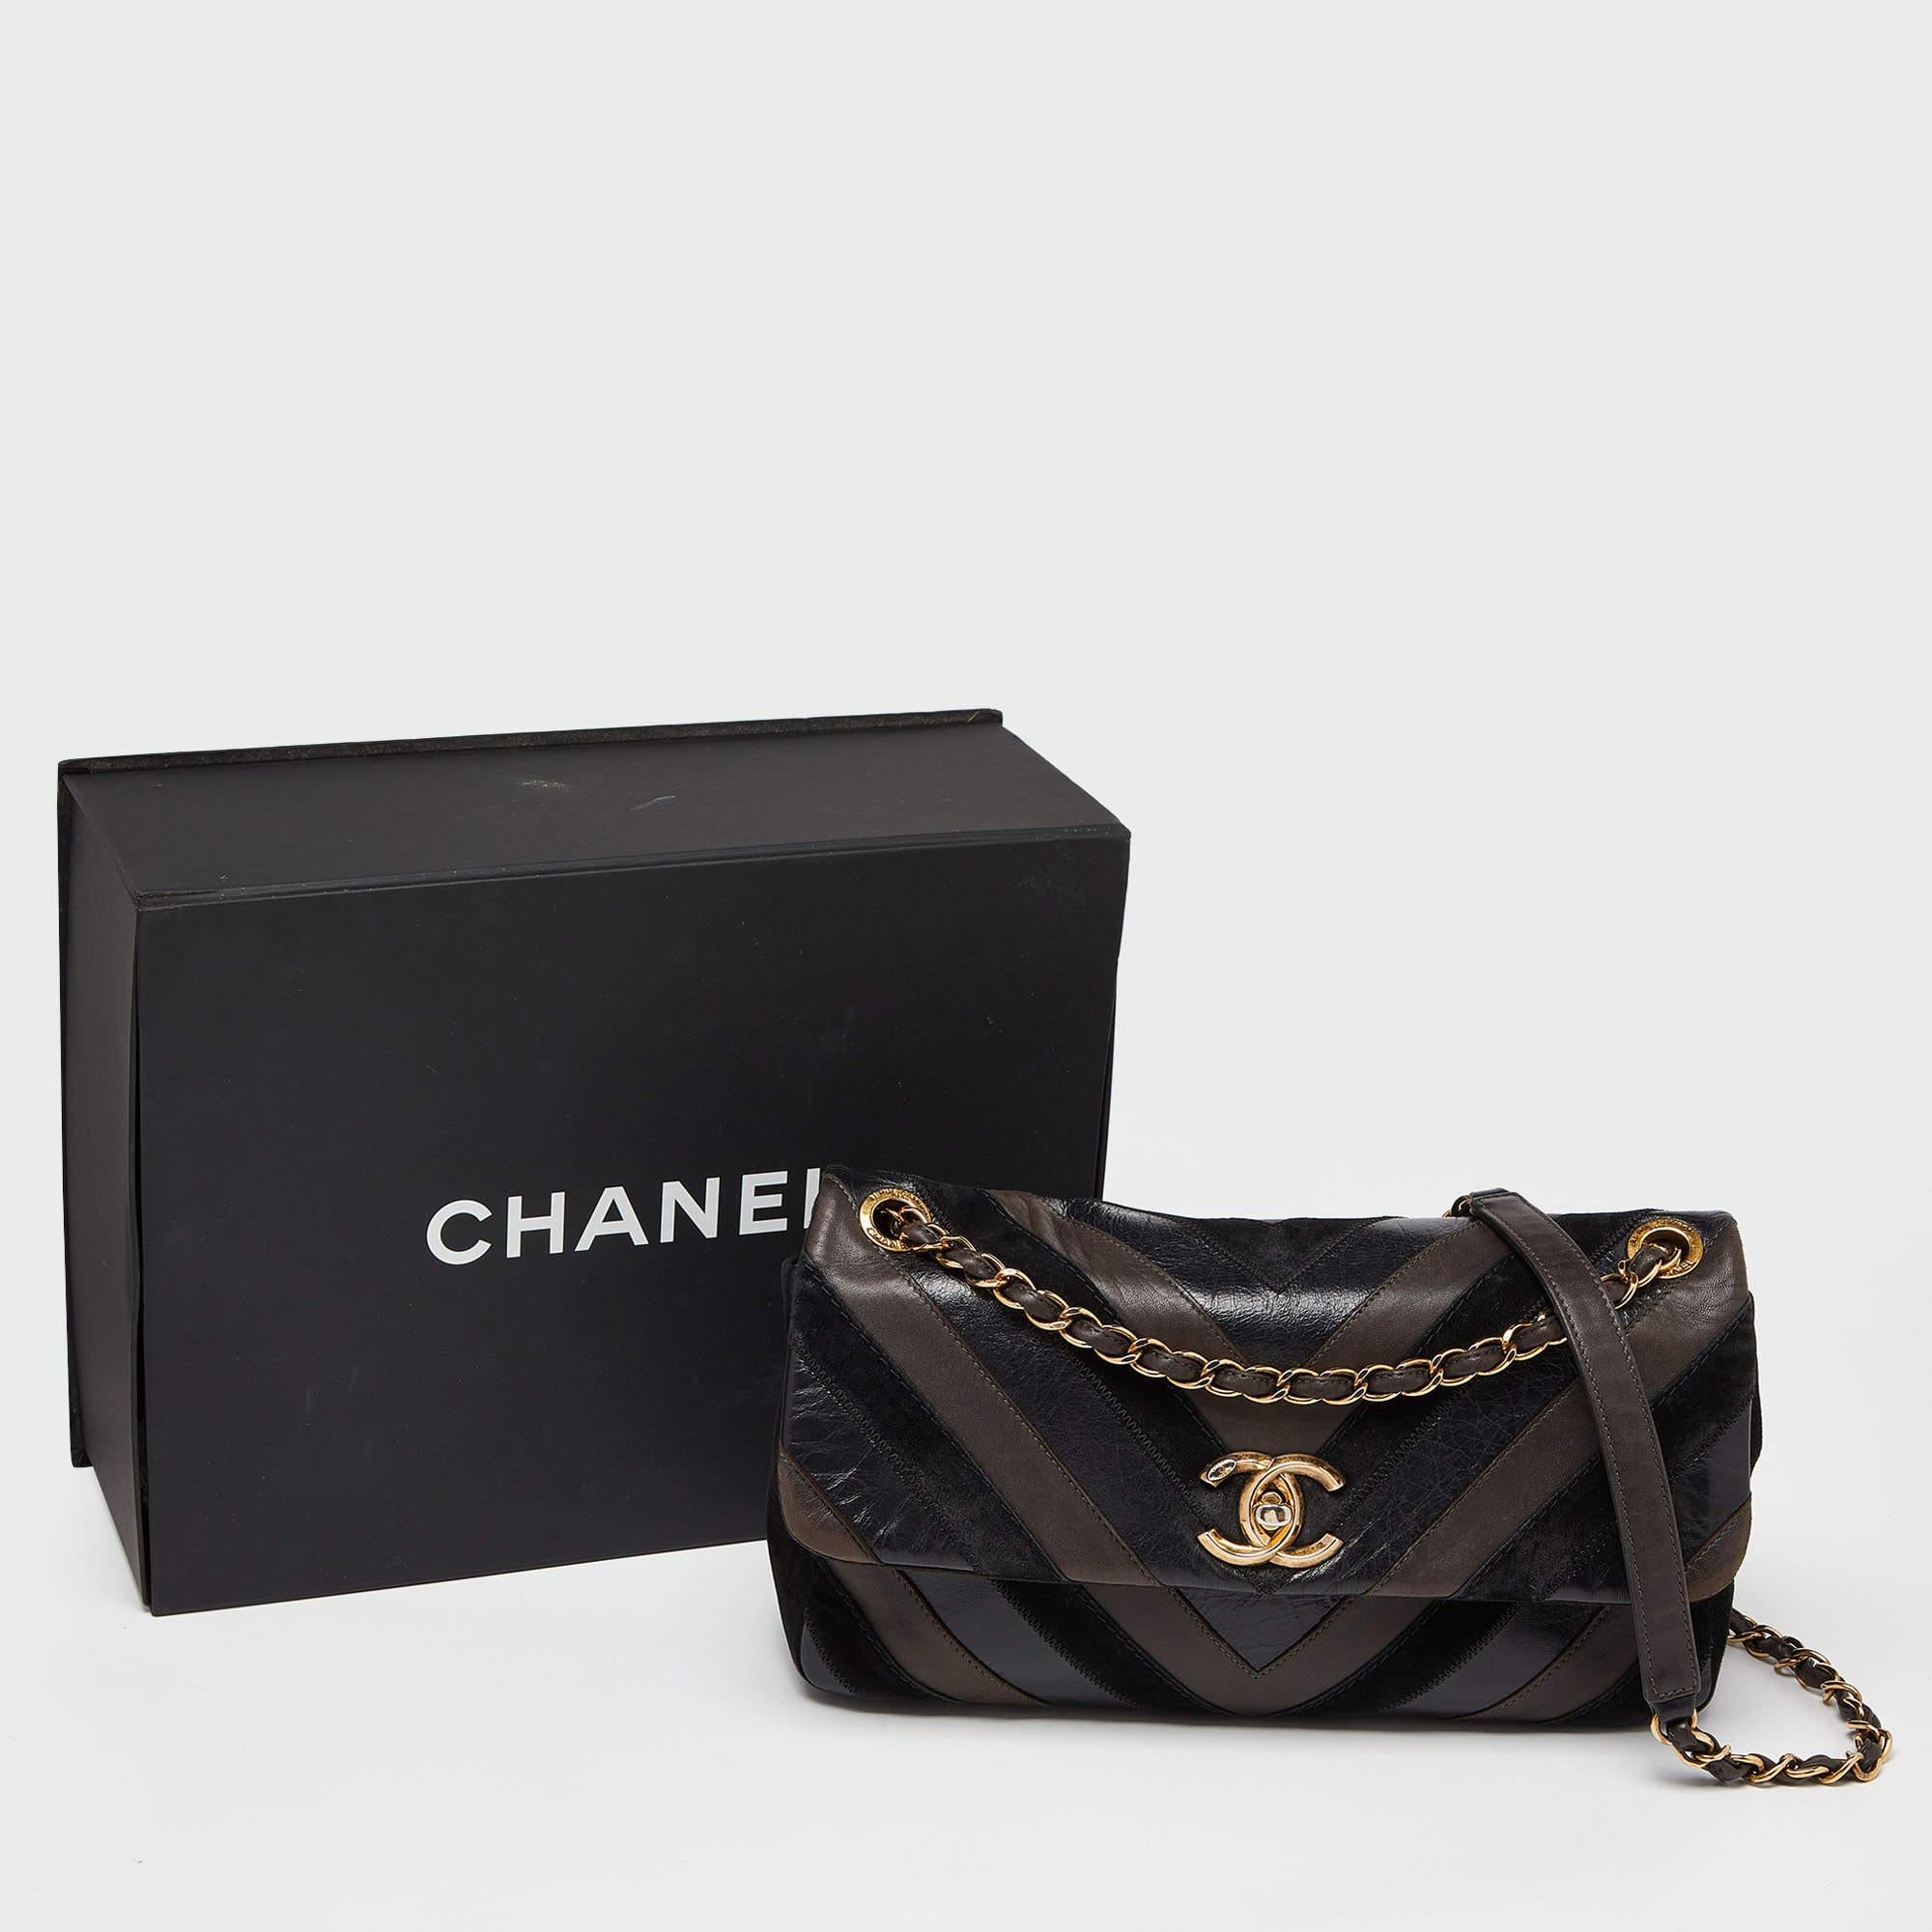 Chanel Black/Brown Chevron Suede and Leather Flap Bag 8